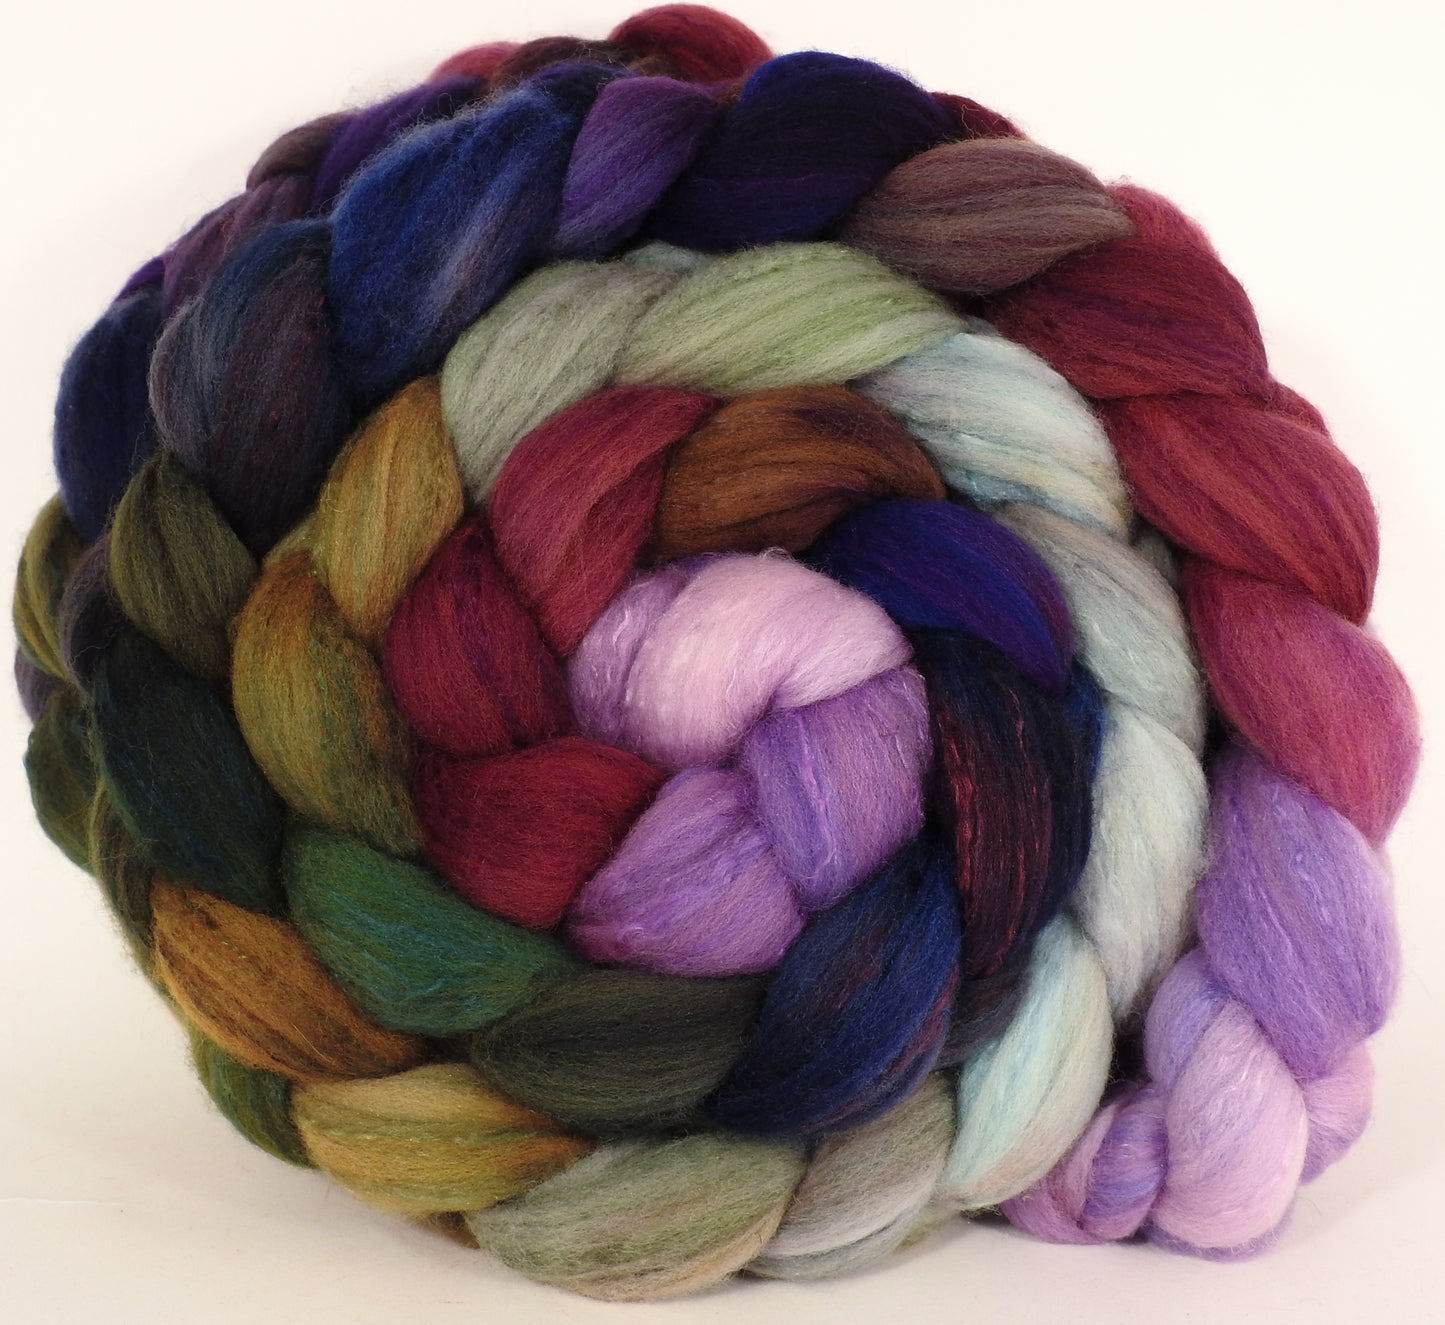 Hand dyed top for spinning - Cabbages and Kings - (5.3 oz) Organic Polwarth / Tussah silk (80/20) - Inglenook Fibers